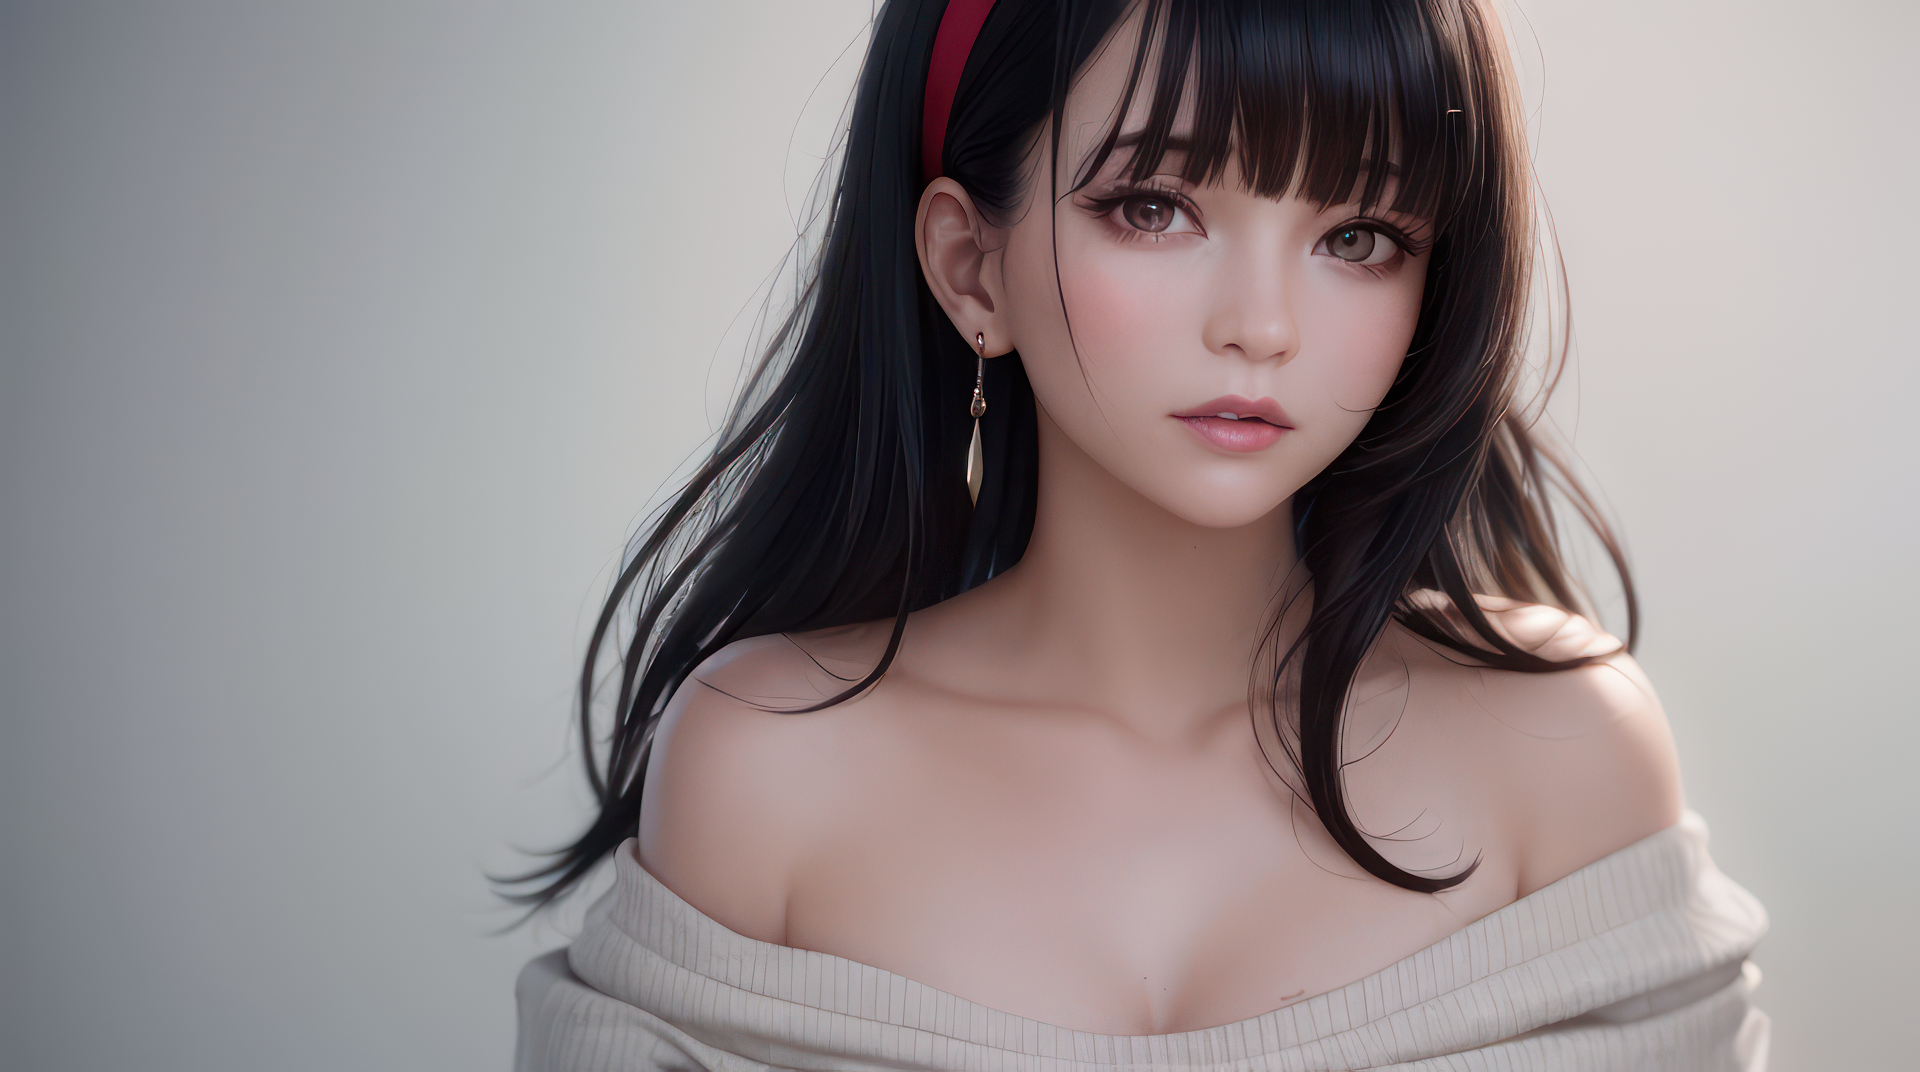 Ai Art Long Hair Black Earring Asian Women Looking At Viewer Sweater Minimalism Simple Background 1920x1072